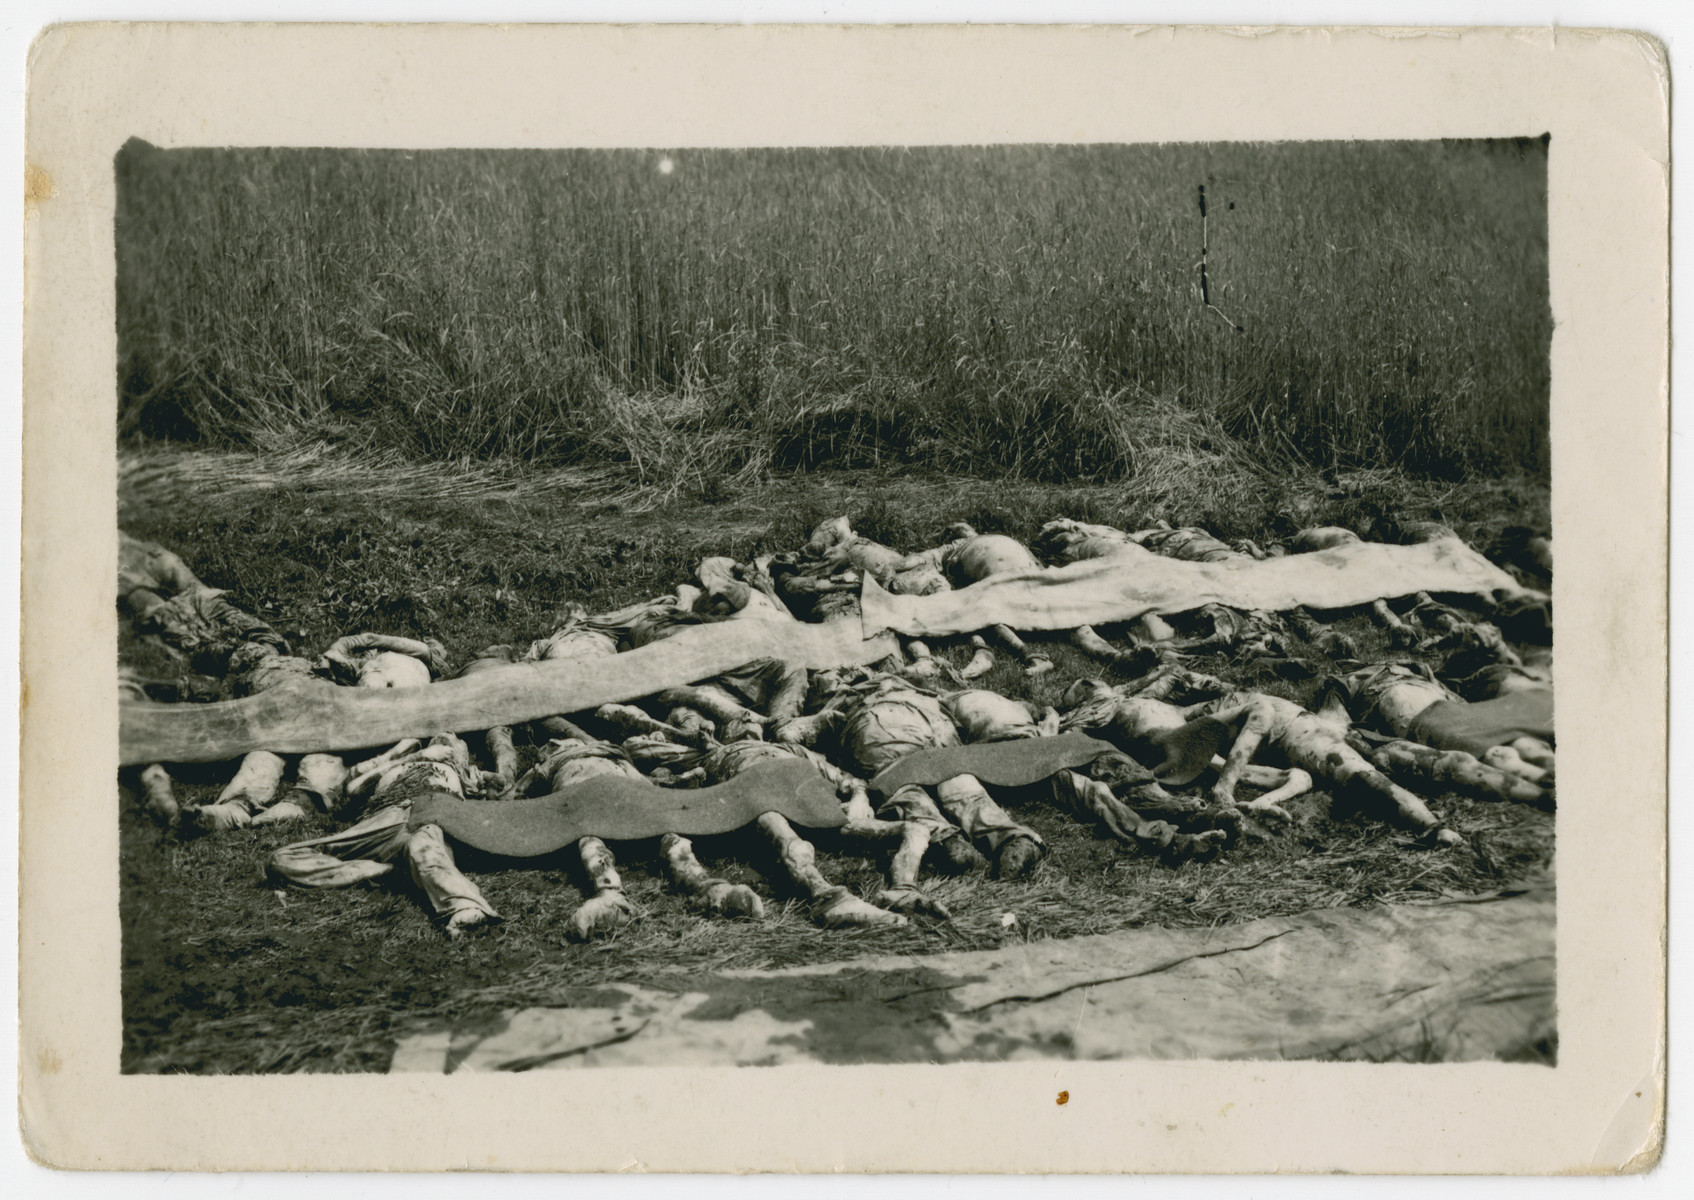 Corpses lie in a row partially covered in preparation for reburial.